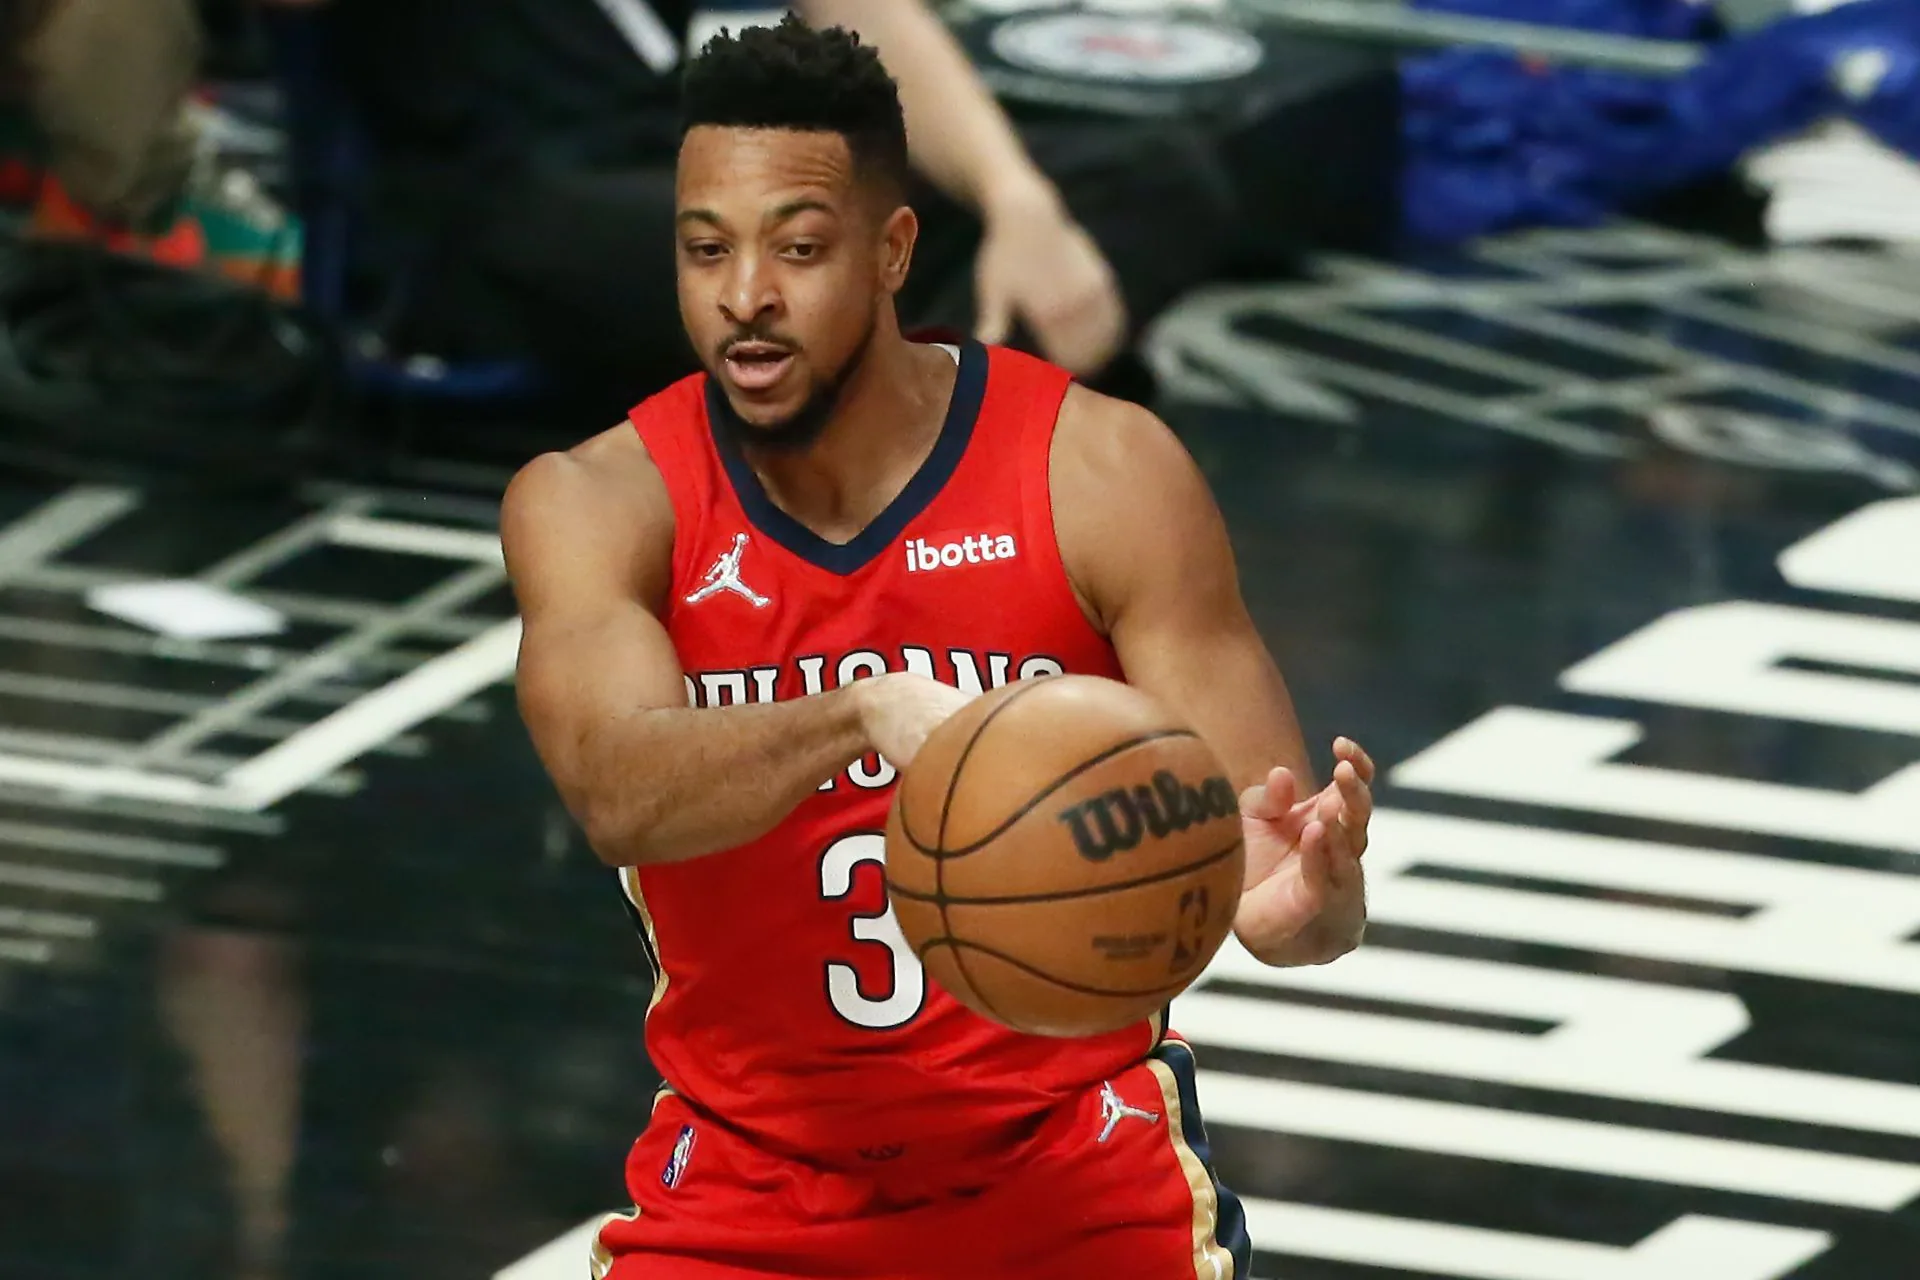 CJ McCollum's Comeback Journey New Orleans Pelicans' Star Set for Eagerly Awaited Return After Lung Injury Recovery